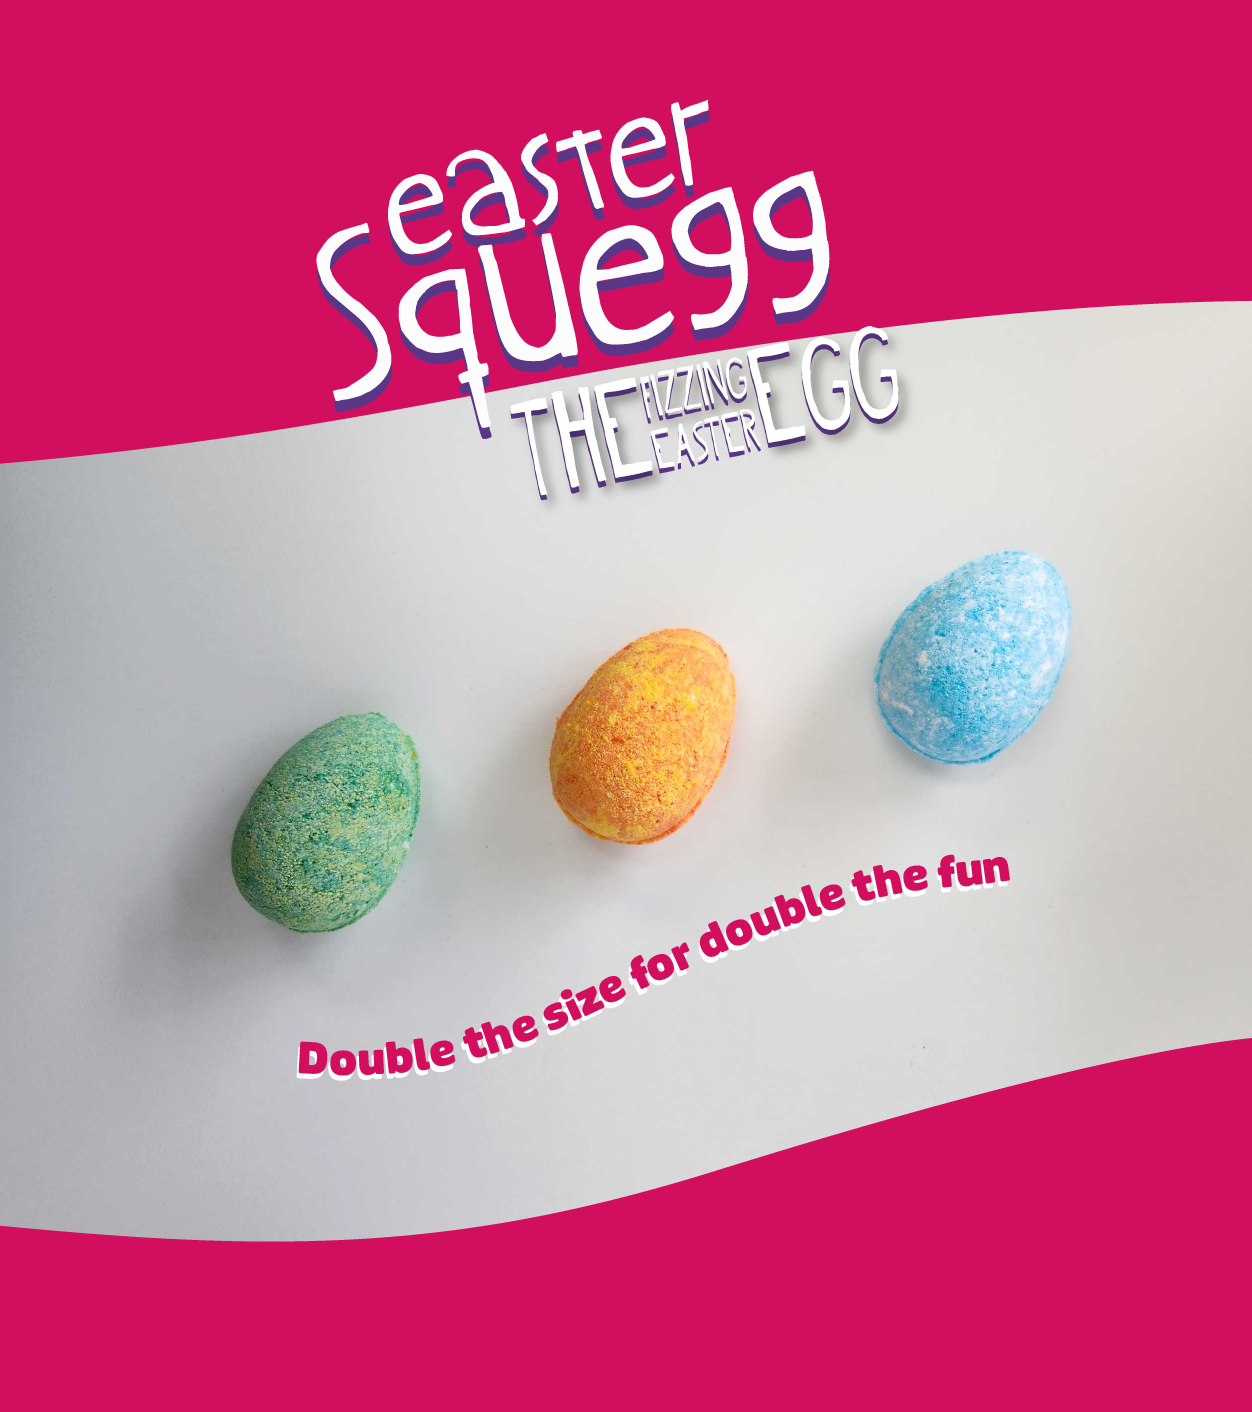 Three egg-shaped bath bombs in the center of the image. The colours of the bath bombs are Green, orange and blue. A written in the shape of wave saying "double the size for double the fun".